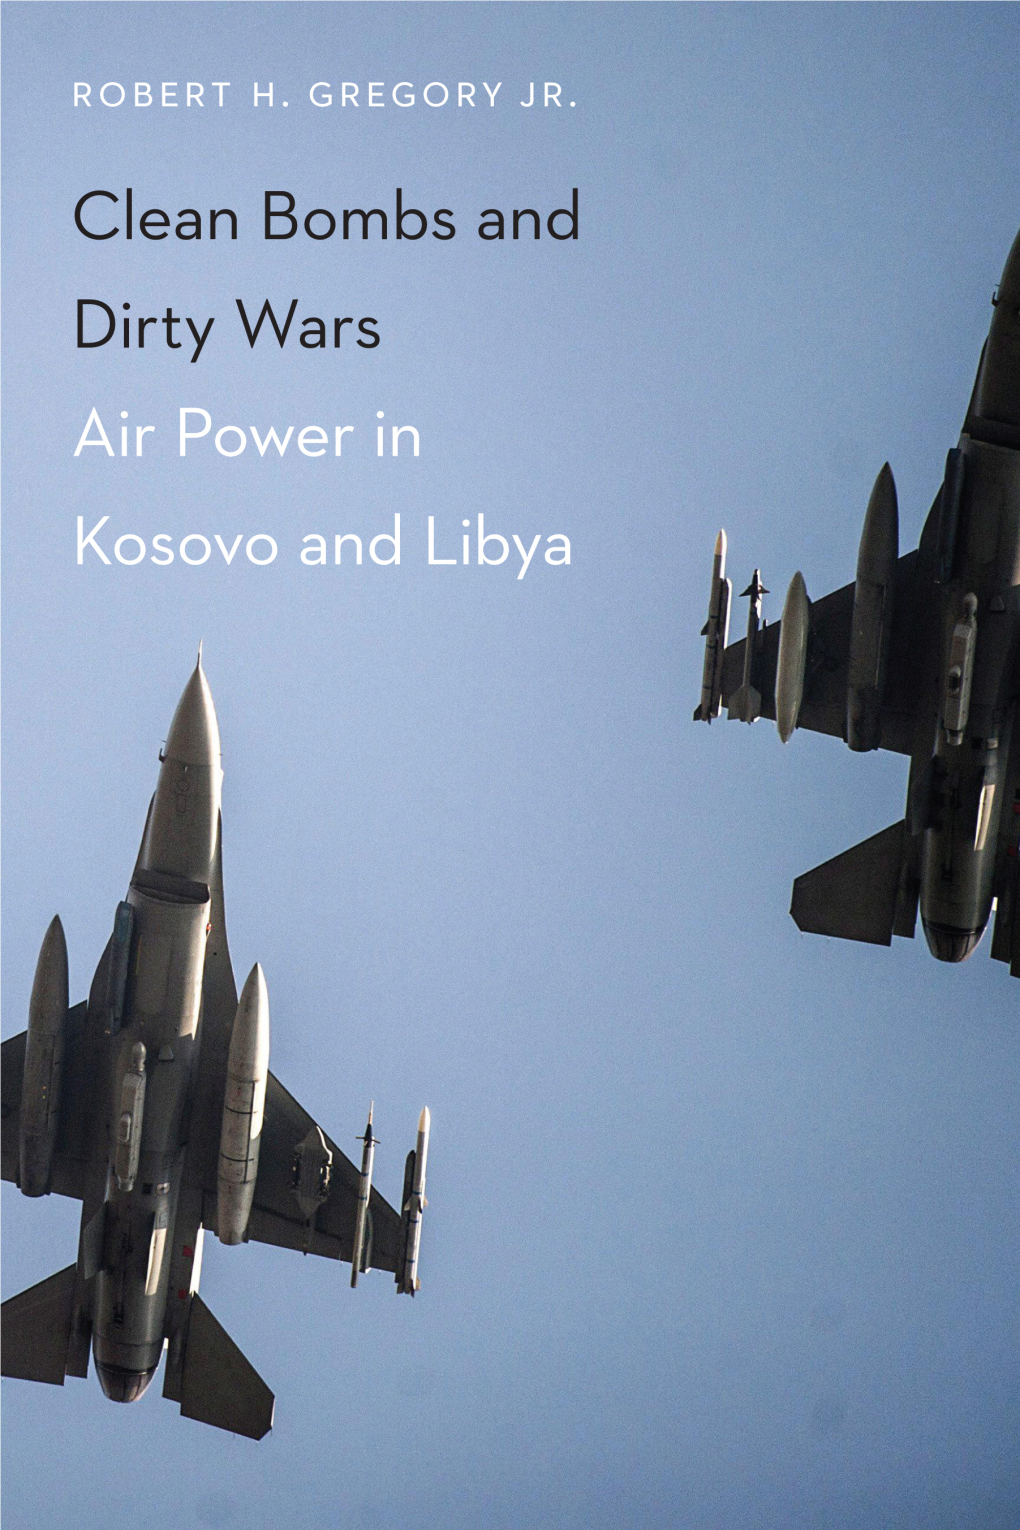 Clean Bombs and Dirty Wars: Air Power in Kosovo and Libya / Robert H